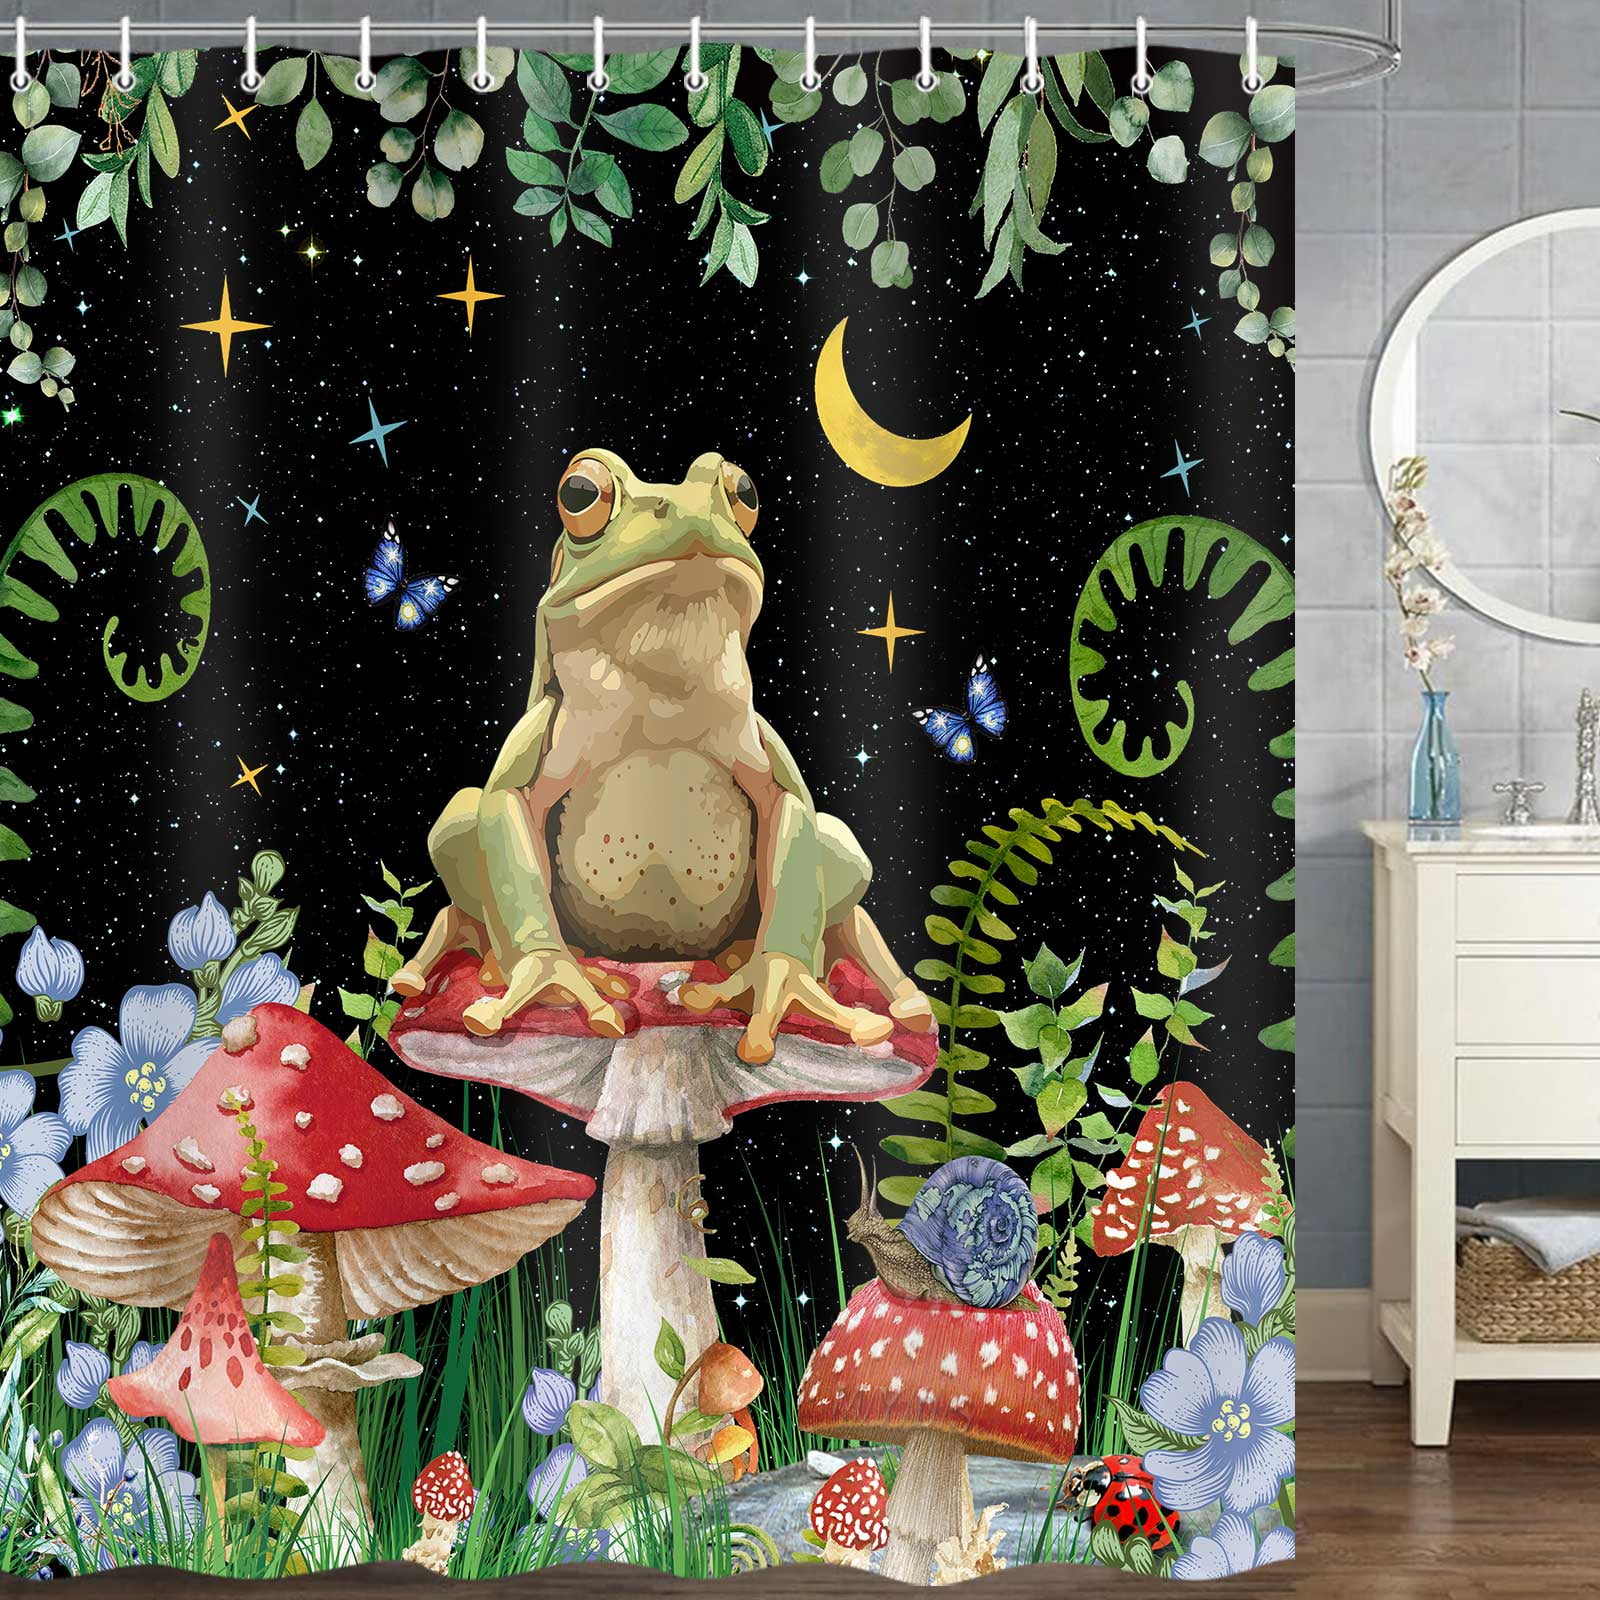 Royal Frogs Shower Curtain by Maarten Wouters 